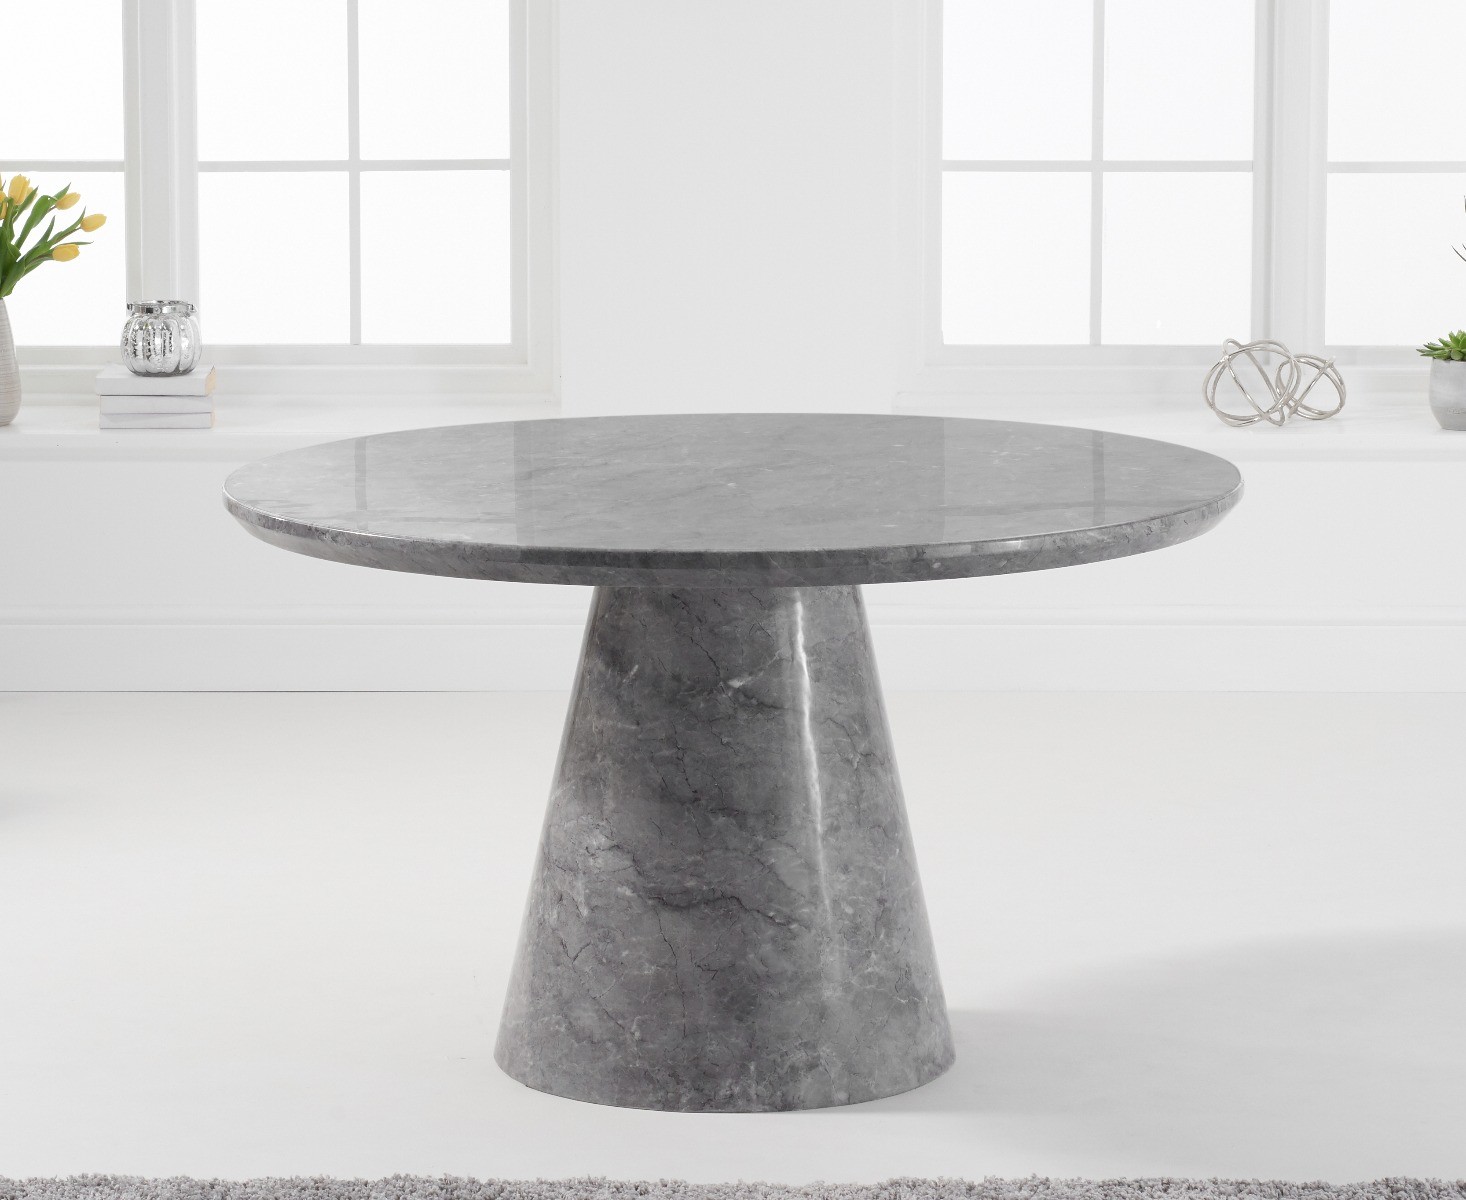 Photo 4 of Ravello 130cm round grey marble dining table with 6 grey lorenzo chairs